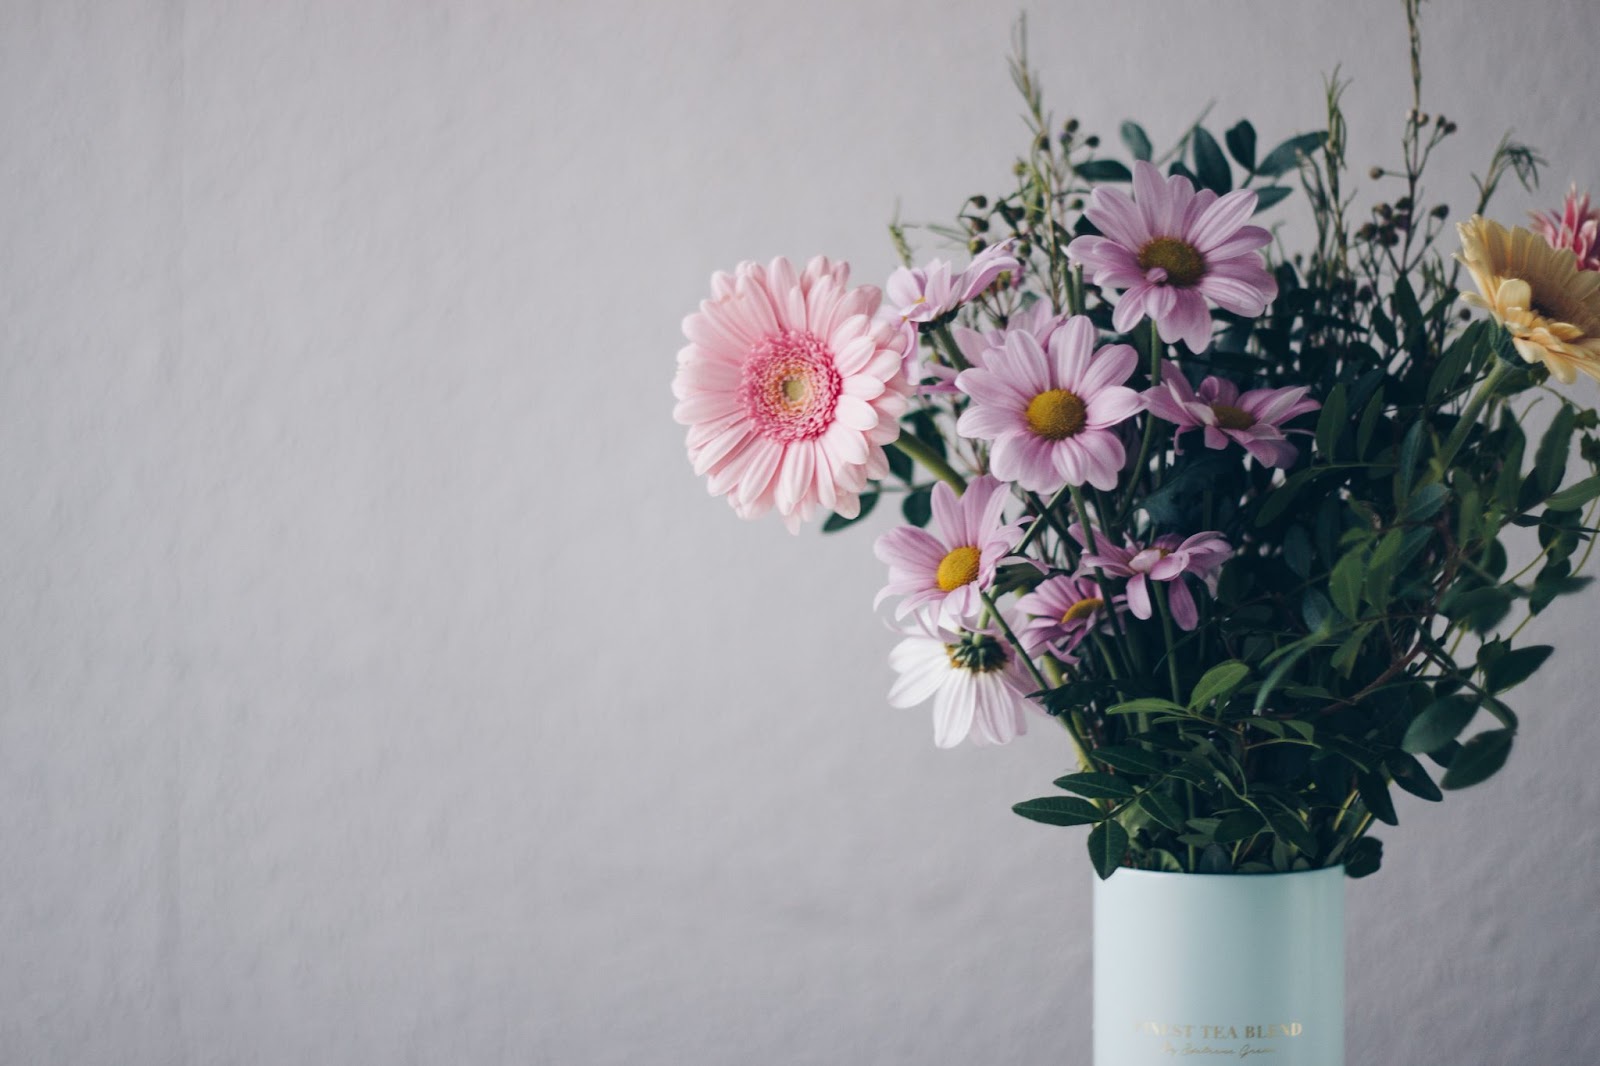 lGQzeYWwxgqpoVG524fxj1nsTKJkGkBBxpZeKCe5H3cMas43gLk9OjtrQvxLLN7fDNkAw8 How To Pick The Perfect Flowers For Any Event: The Essential Guide